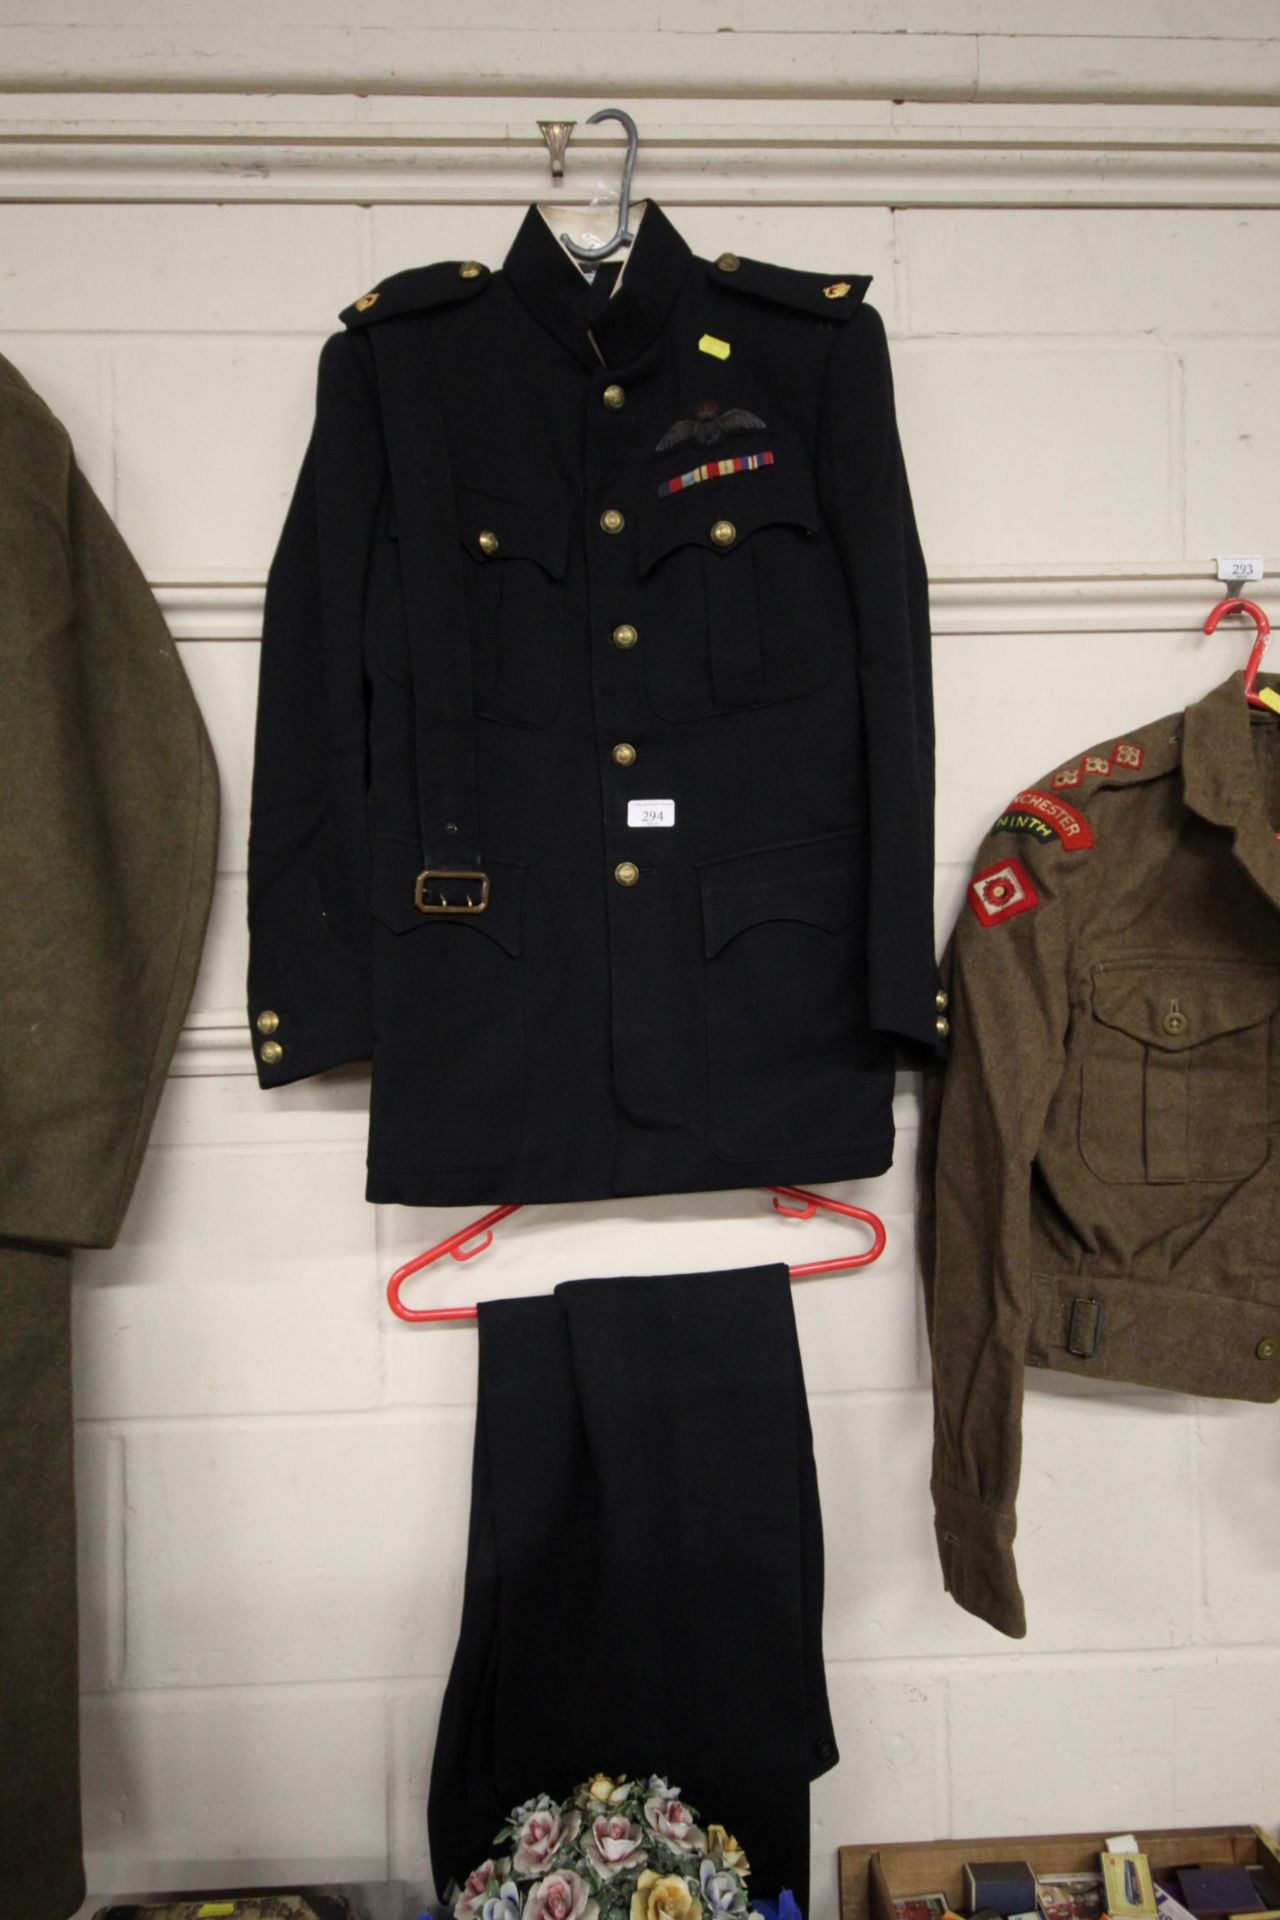 An RAF dress suit with badges